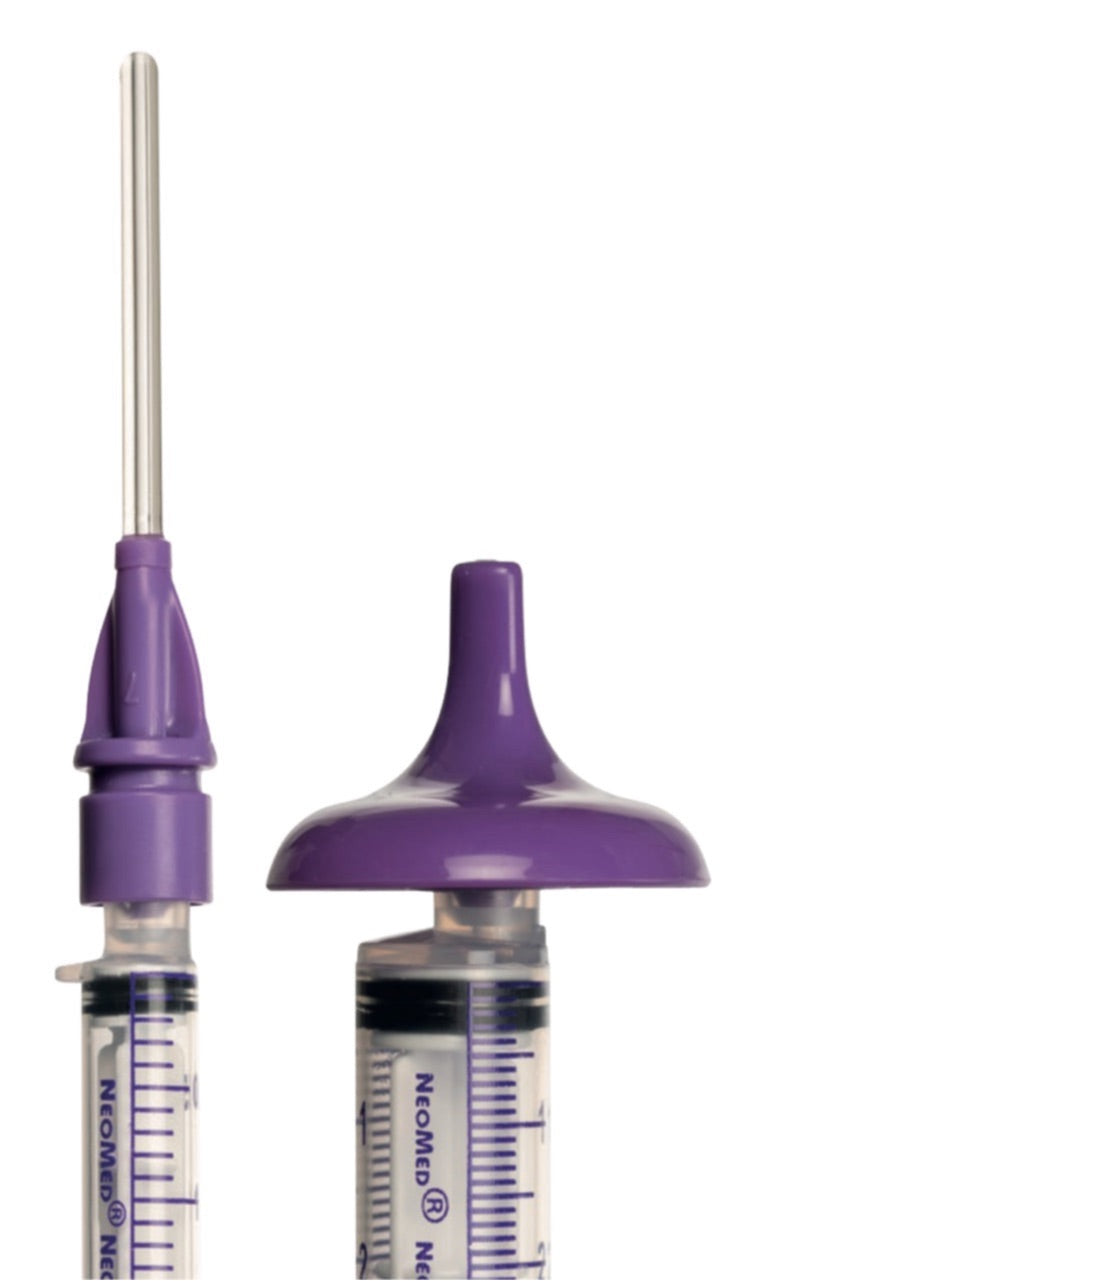 DoseMate — Syringe Adapters for Oral Use by Avanos (ENFit Compatible)